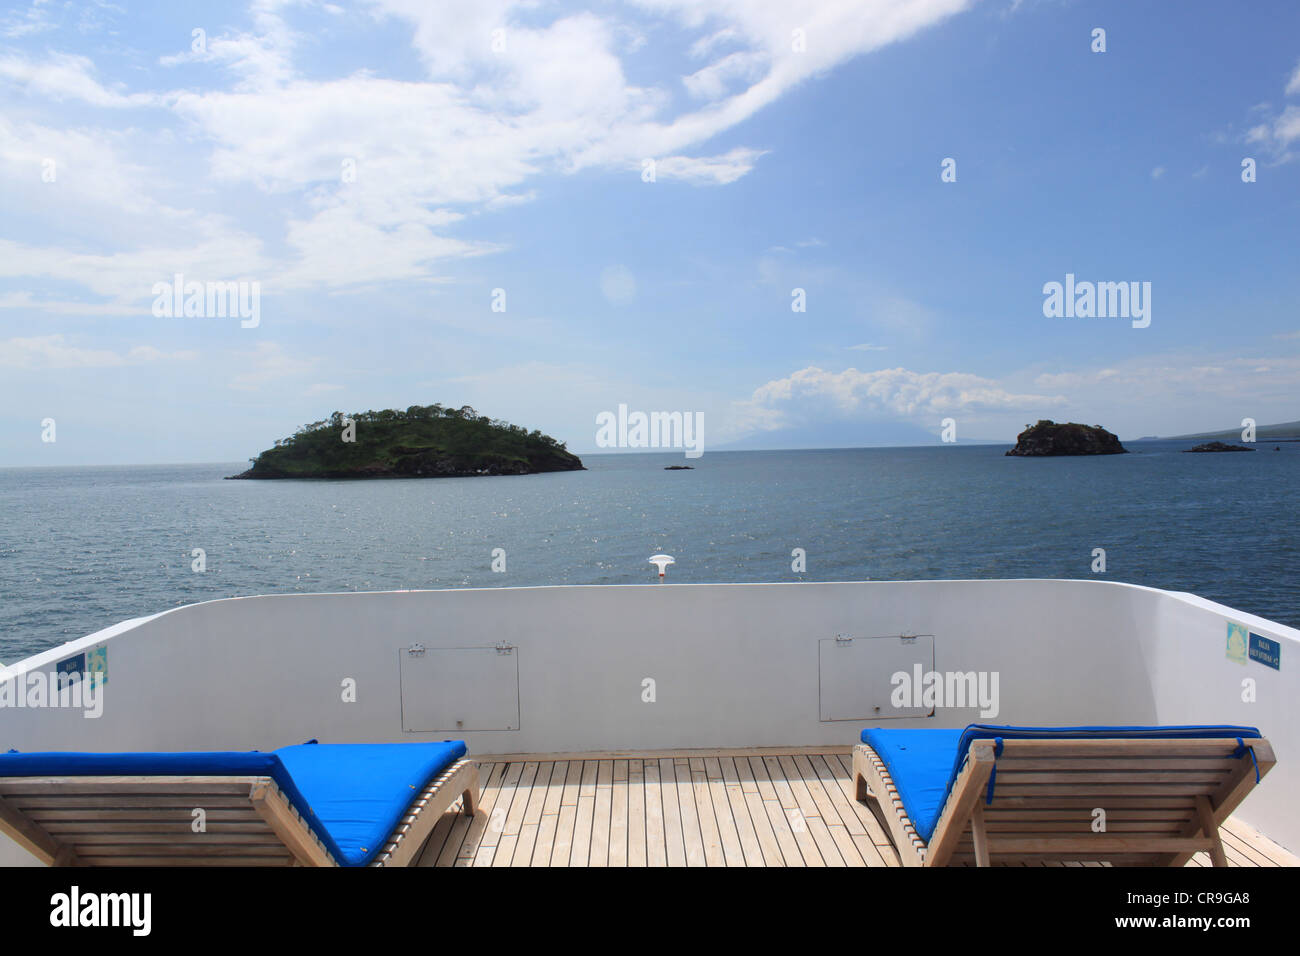 Two empty sun loungers on deck of boat overlooking two small islands Stock Photo